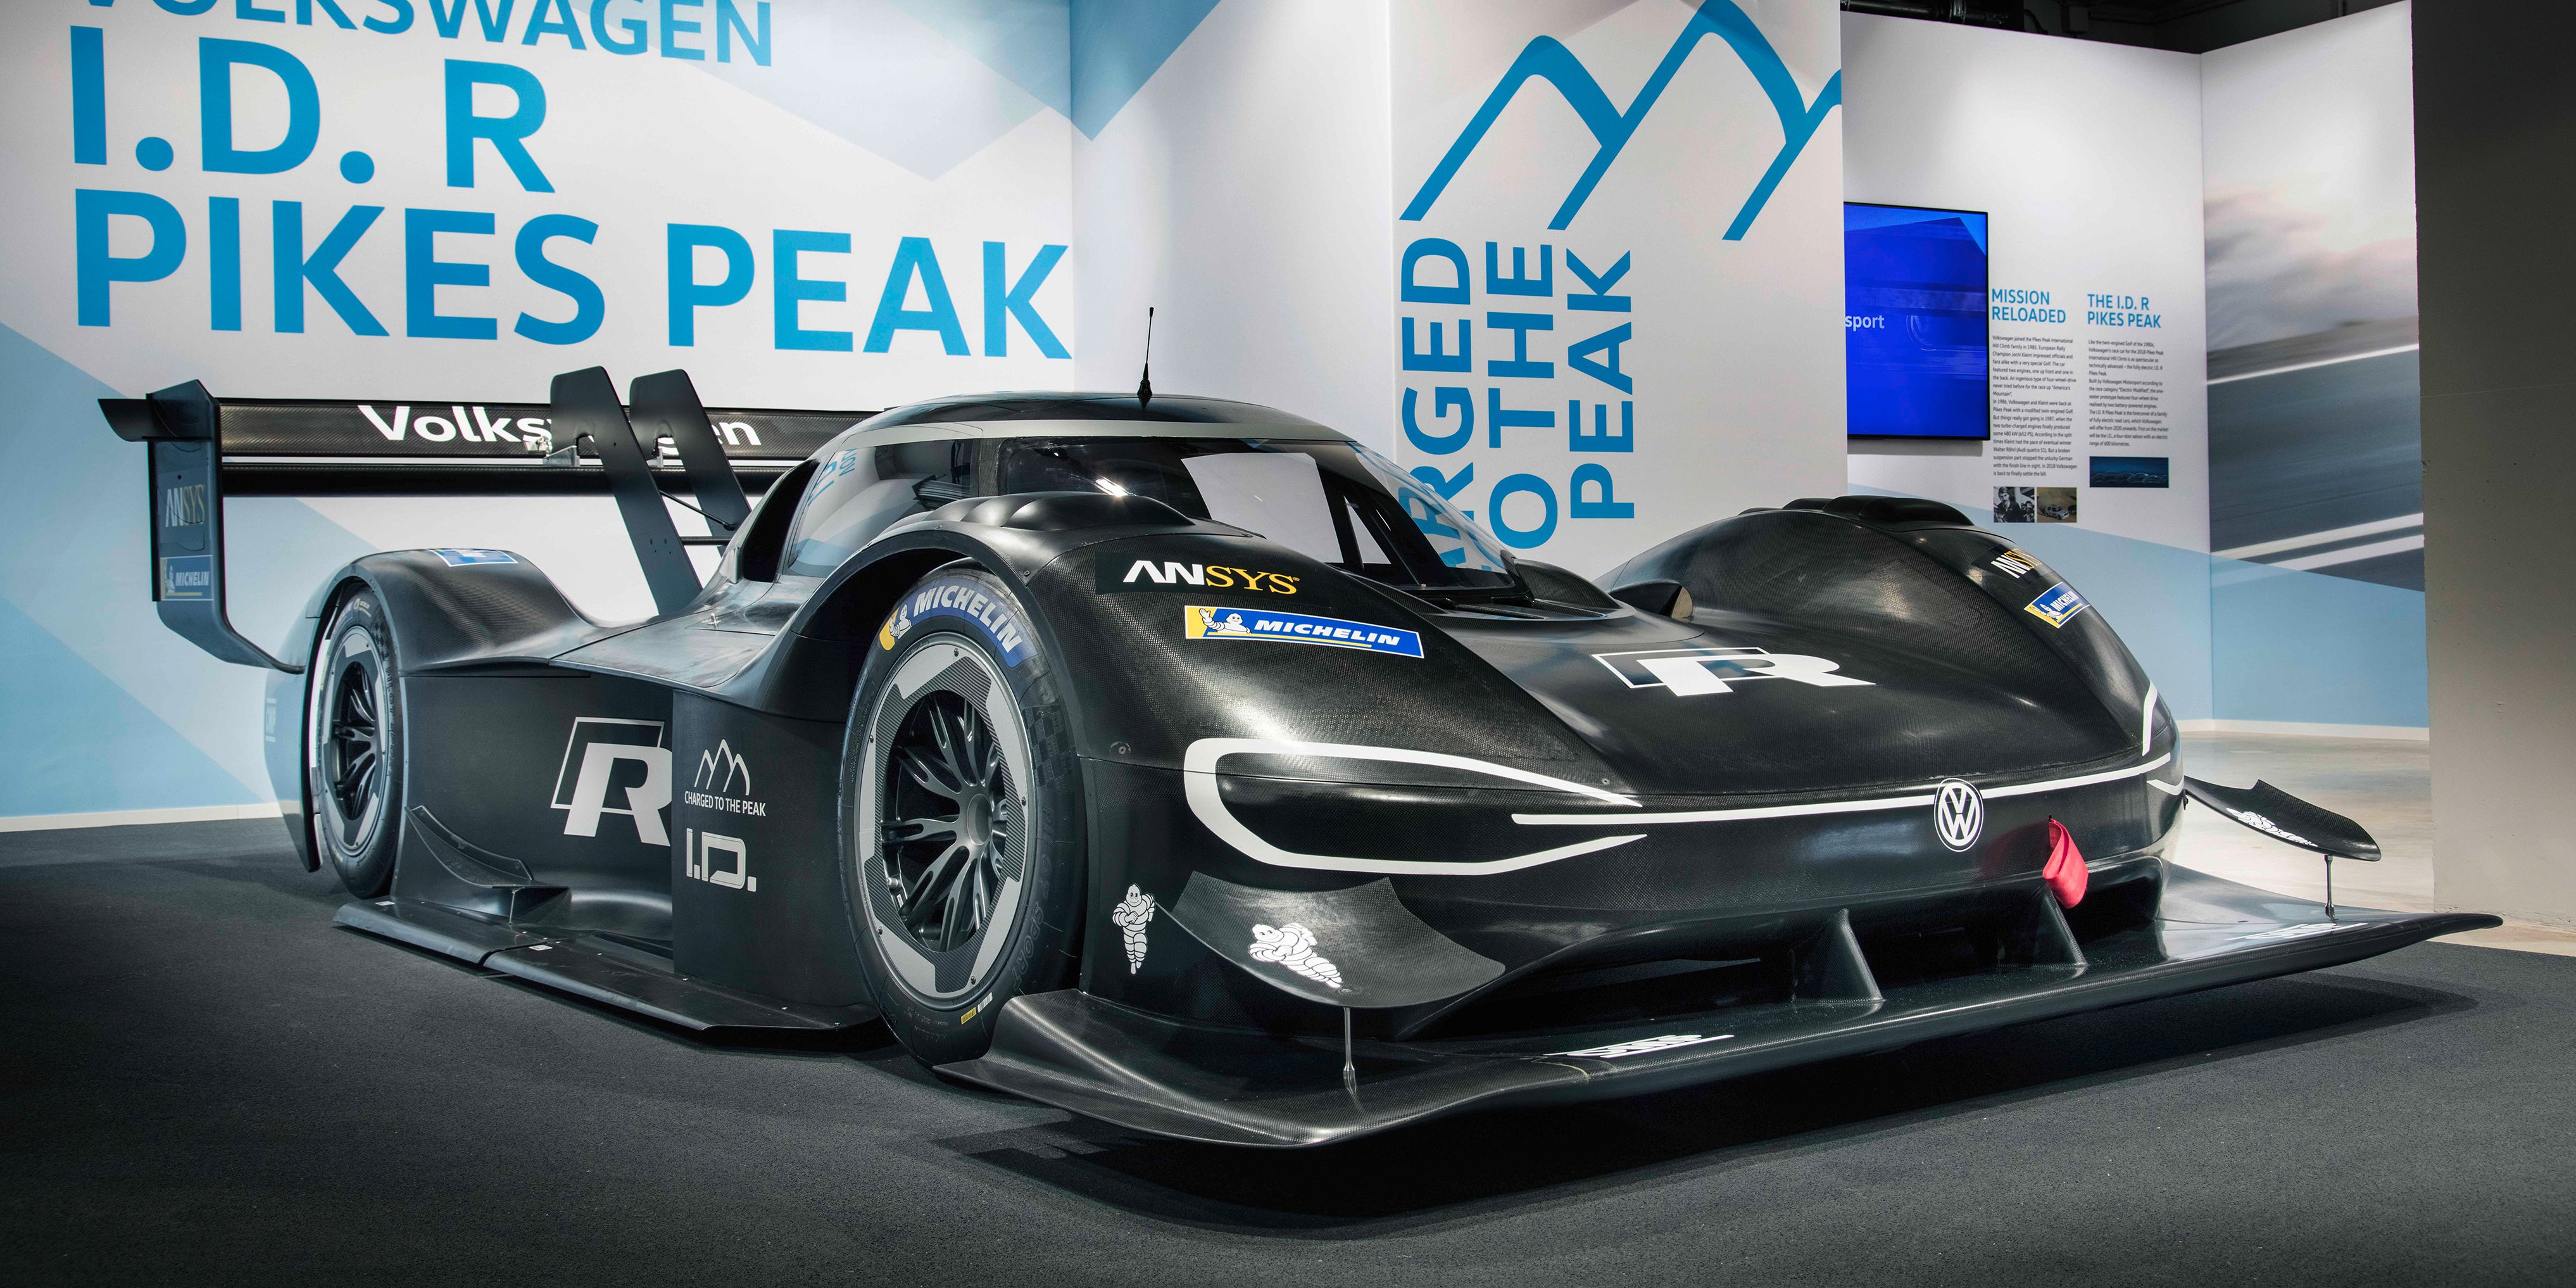 unveils new all-electric car to climb Pikes Peak this summer | Electrek